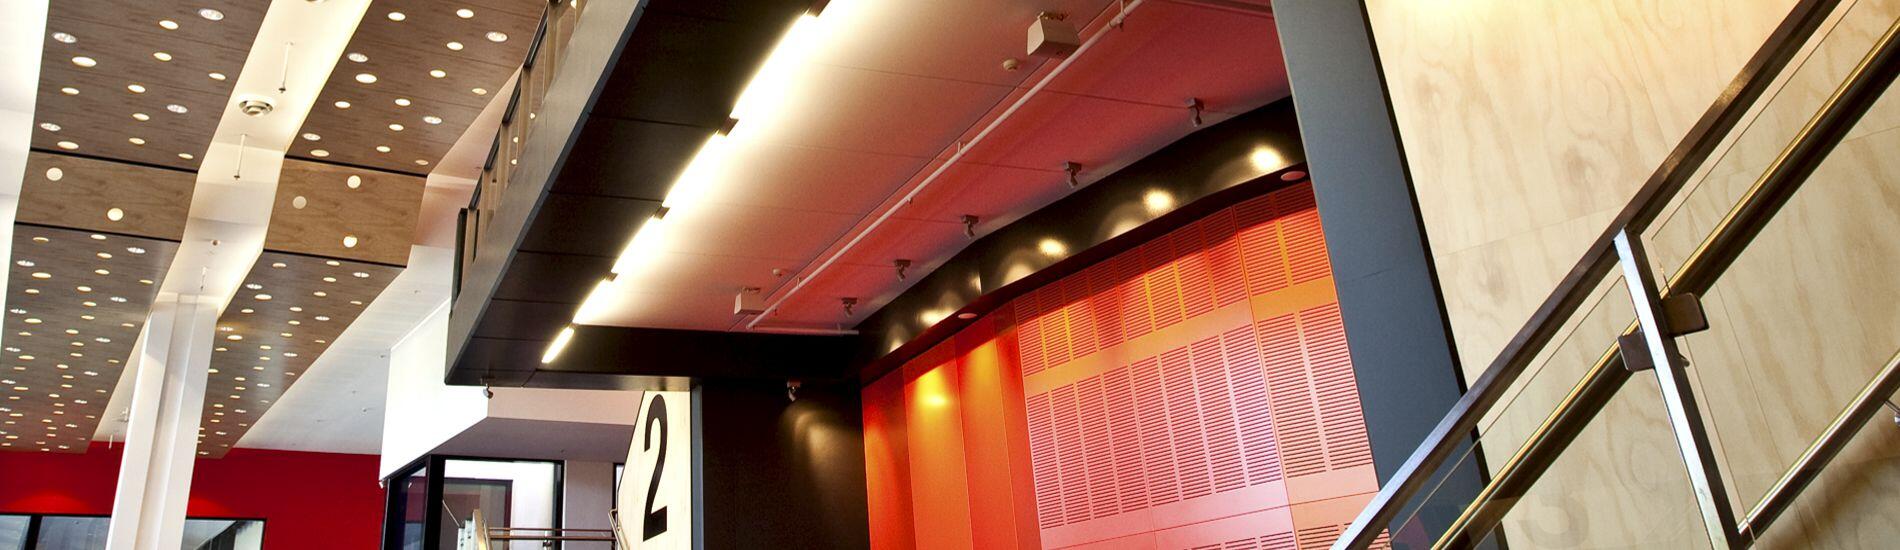 SUPALINE Decorative and Supacoustic Acoustic Panels Offers Budget Lining Solution for Art Centre